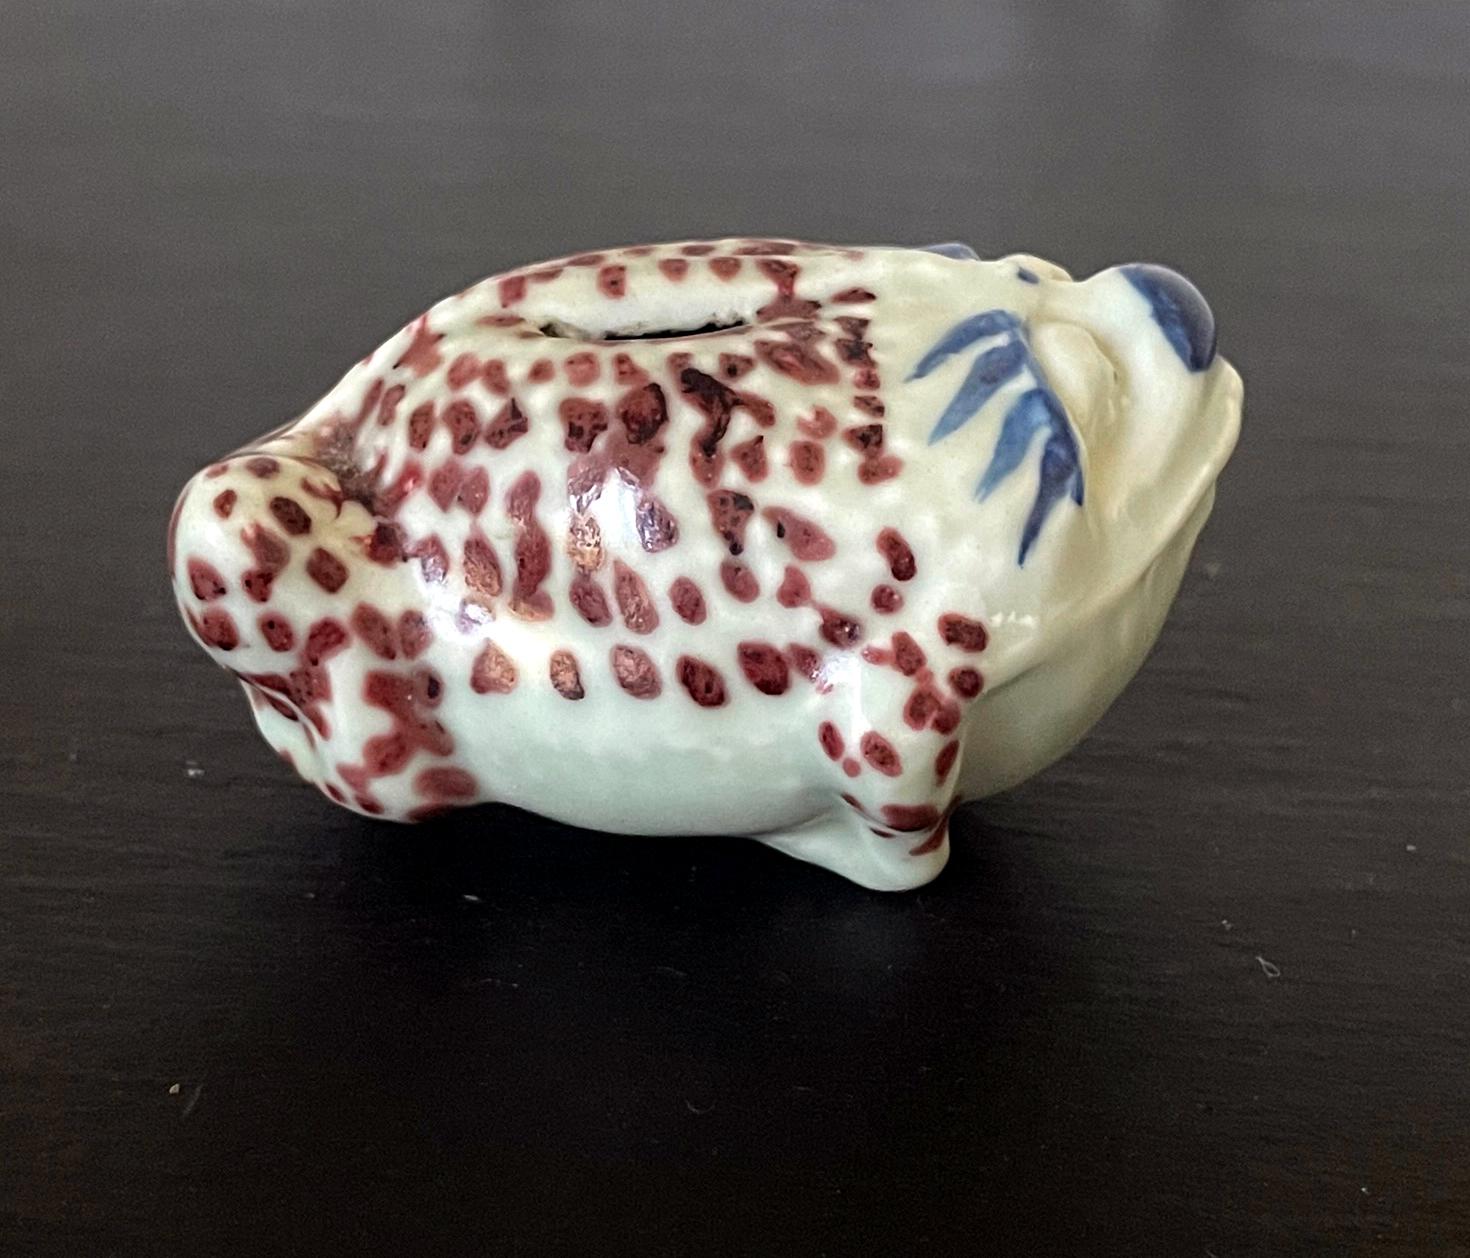 A Korean ceramic water dropper in the form of fog circa early 20th century likely from Japanese colonial time post 1910s. The animal form features underglaze blue paint and iron red dotted markings covering the body. The rendition was rather rustic